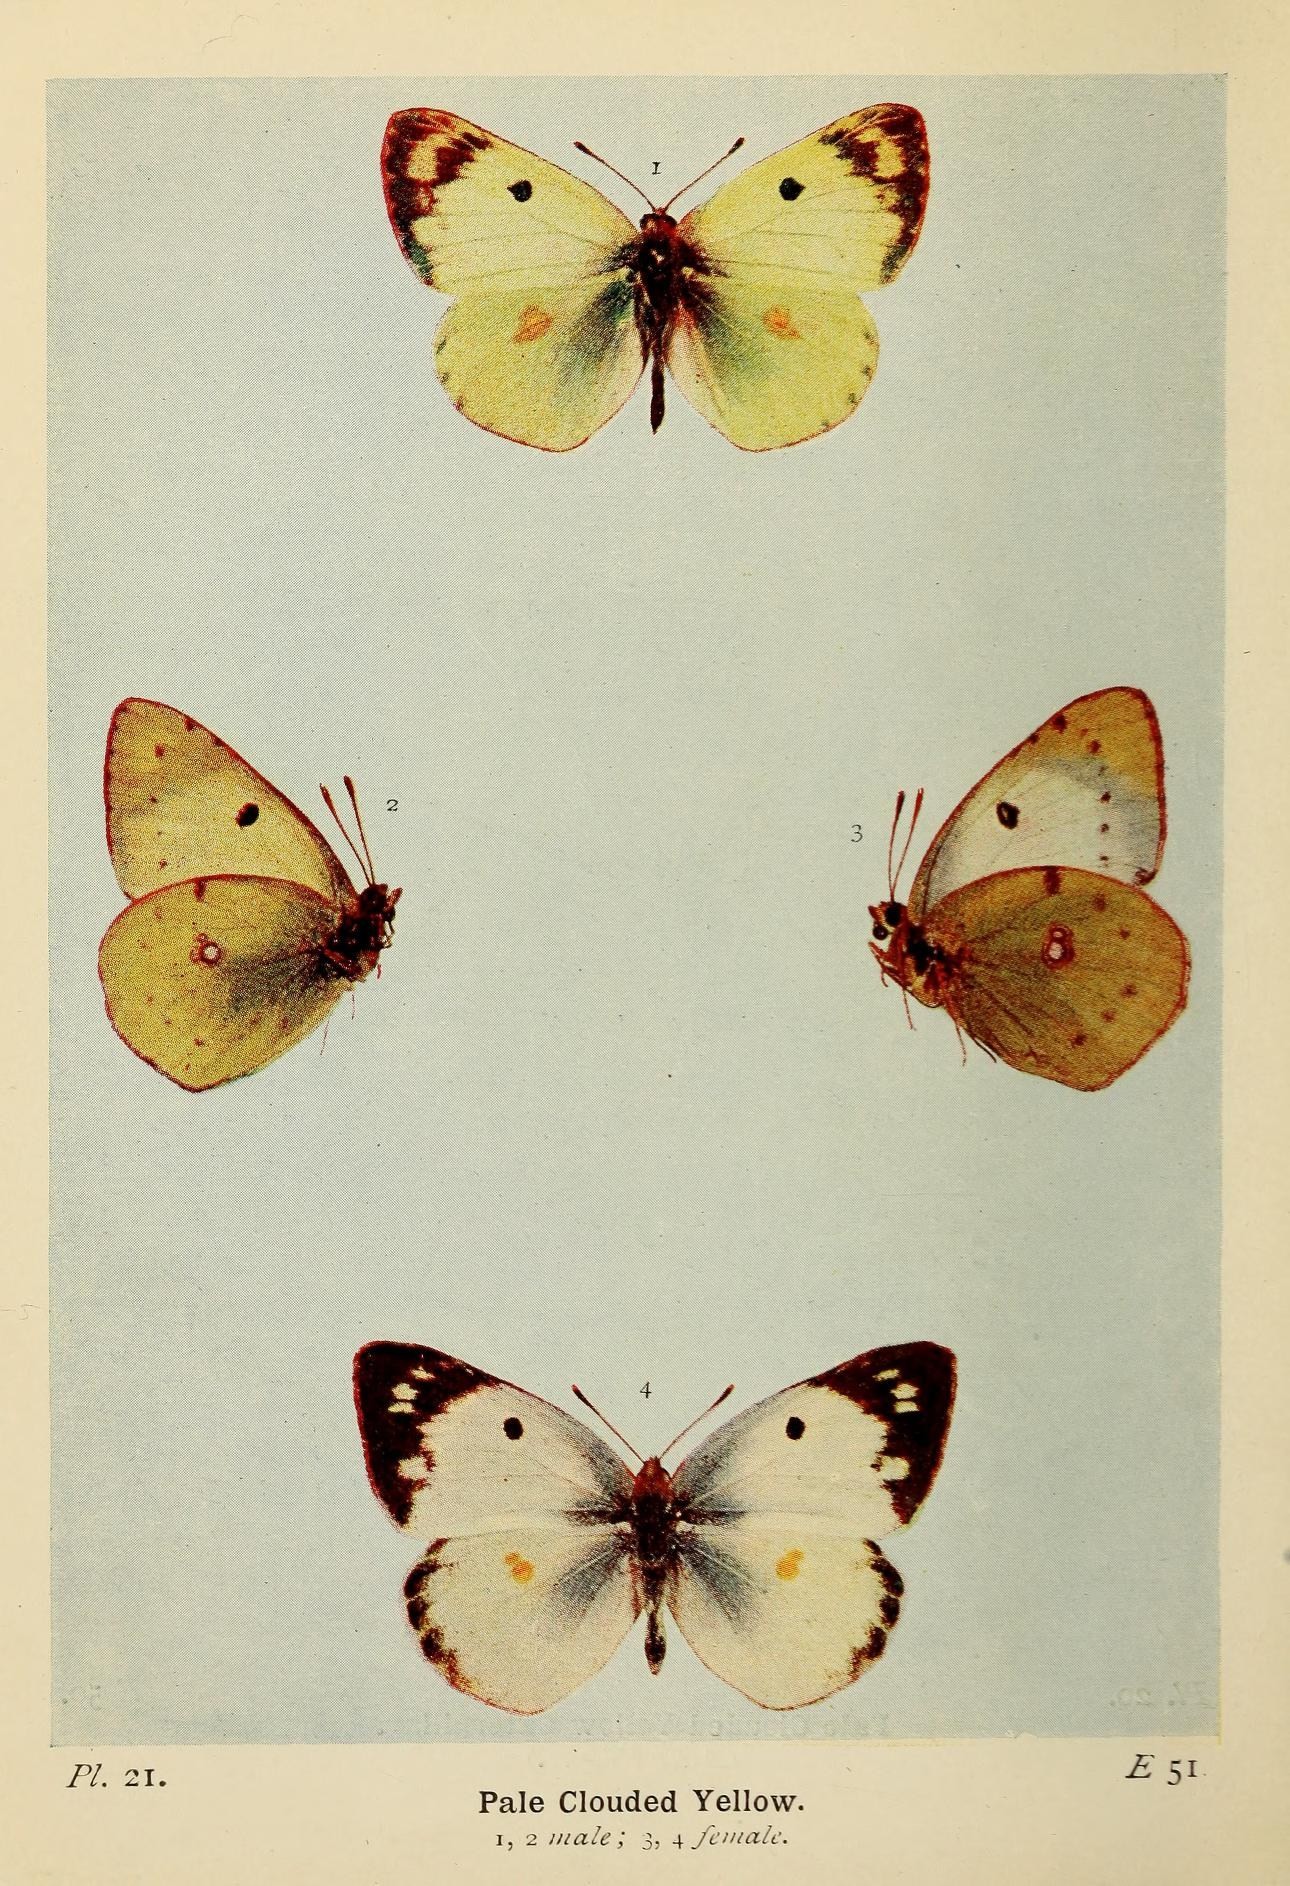 four different colored erflies in different styles and sizes